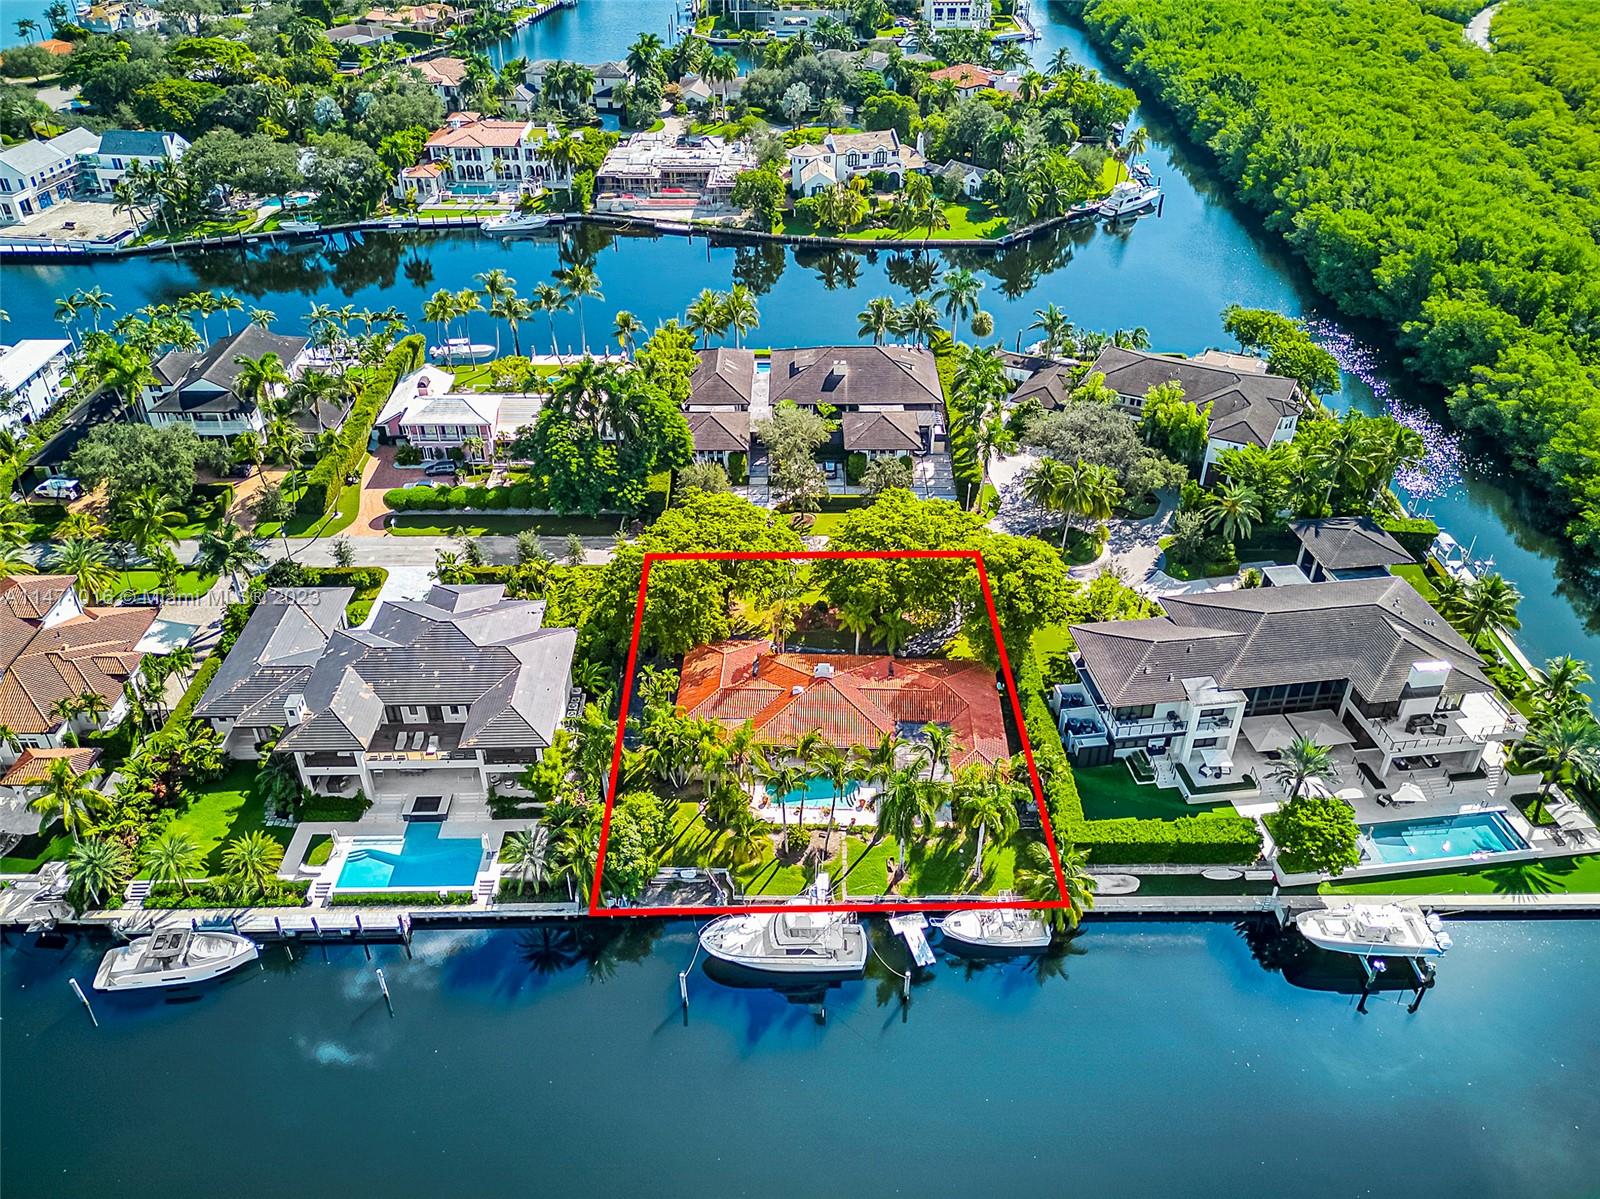 Welcome to the exclusive private and gaurded community of Old Cutler Bay, this is a rare jewel waterfront home available for the first time in 37 years. Get ready to build your dream home on this 22,349 Sqft LOT, with Direct Ocean Access and neigboring some of the wealthiest in the world. Once in a lifetime opportunity with 140 FT of waterfrontage for your new Yacht. Visit the best shops and restaurants with Top schools located near by. Rated one of the safest neighborhoods in the country.